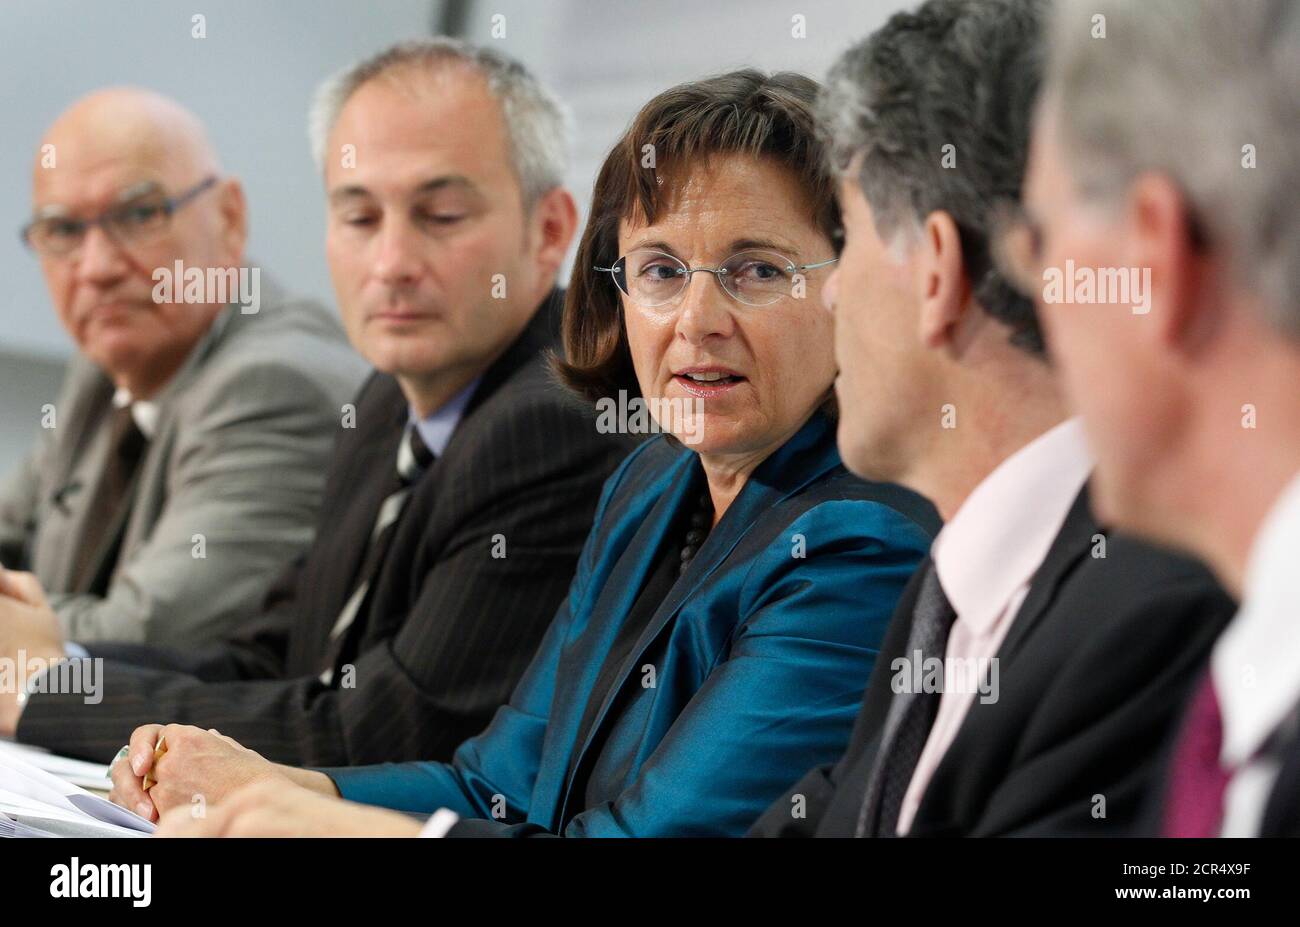 Ursula Renold (C), Director of the Federal bureau of vocational education and technology speaks next to Bernhard Pulver (2L), Cantonal Councillor of the canton Bern, National Councillor Otto Ineichen (L), Hans-Ulrich Bigler, (R) Director of the Swiss trade and crafts association and Philippe Gnaegi (2R) Cantonal Councillor of the canton Neuchatel, at a news conference on school leaver without degree in Bern June 20, 2011. REUTERS/Pascal Lauener (SWITZERLAND - Tags: POLITICS) Stock Photo